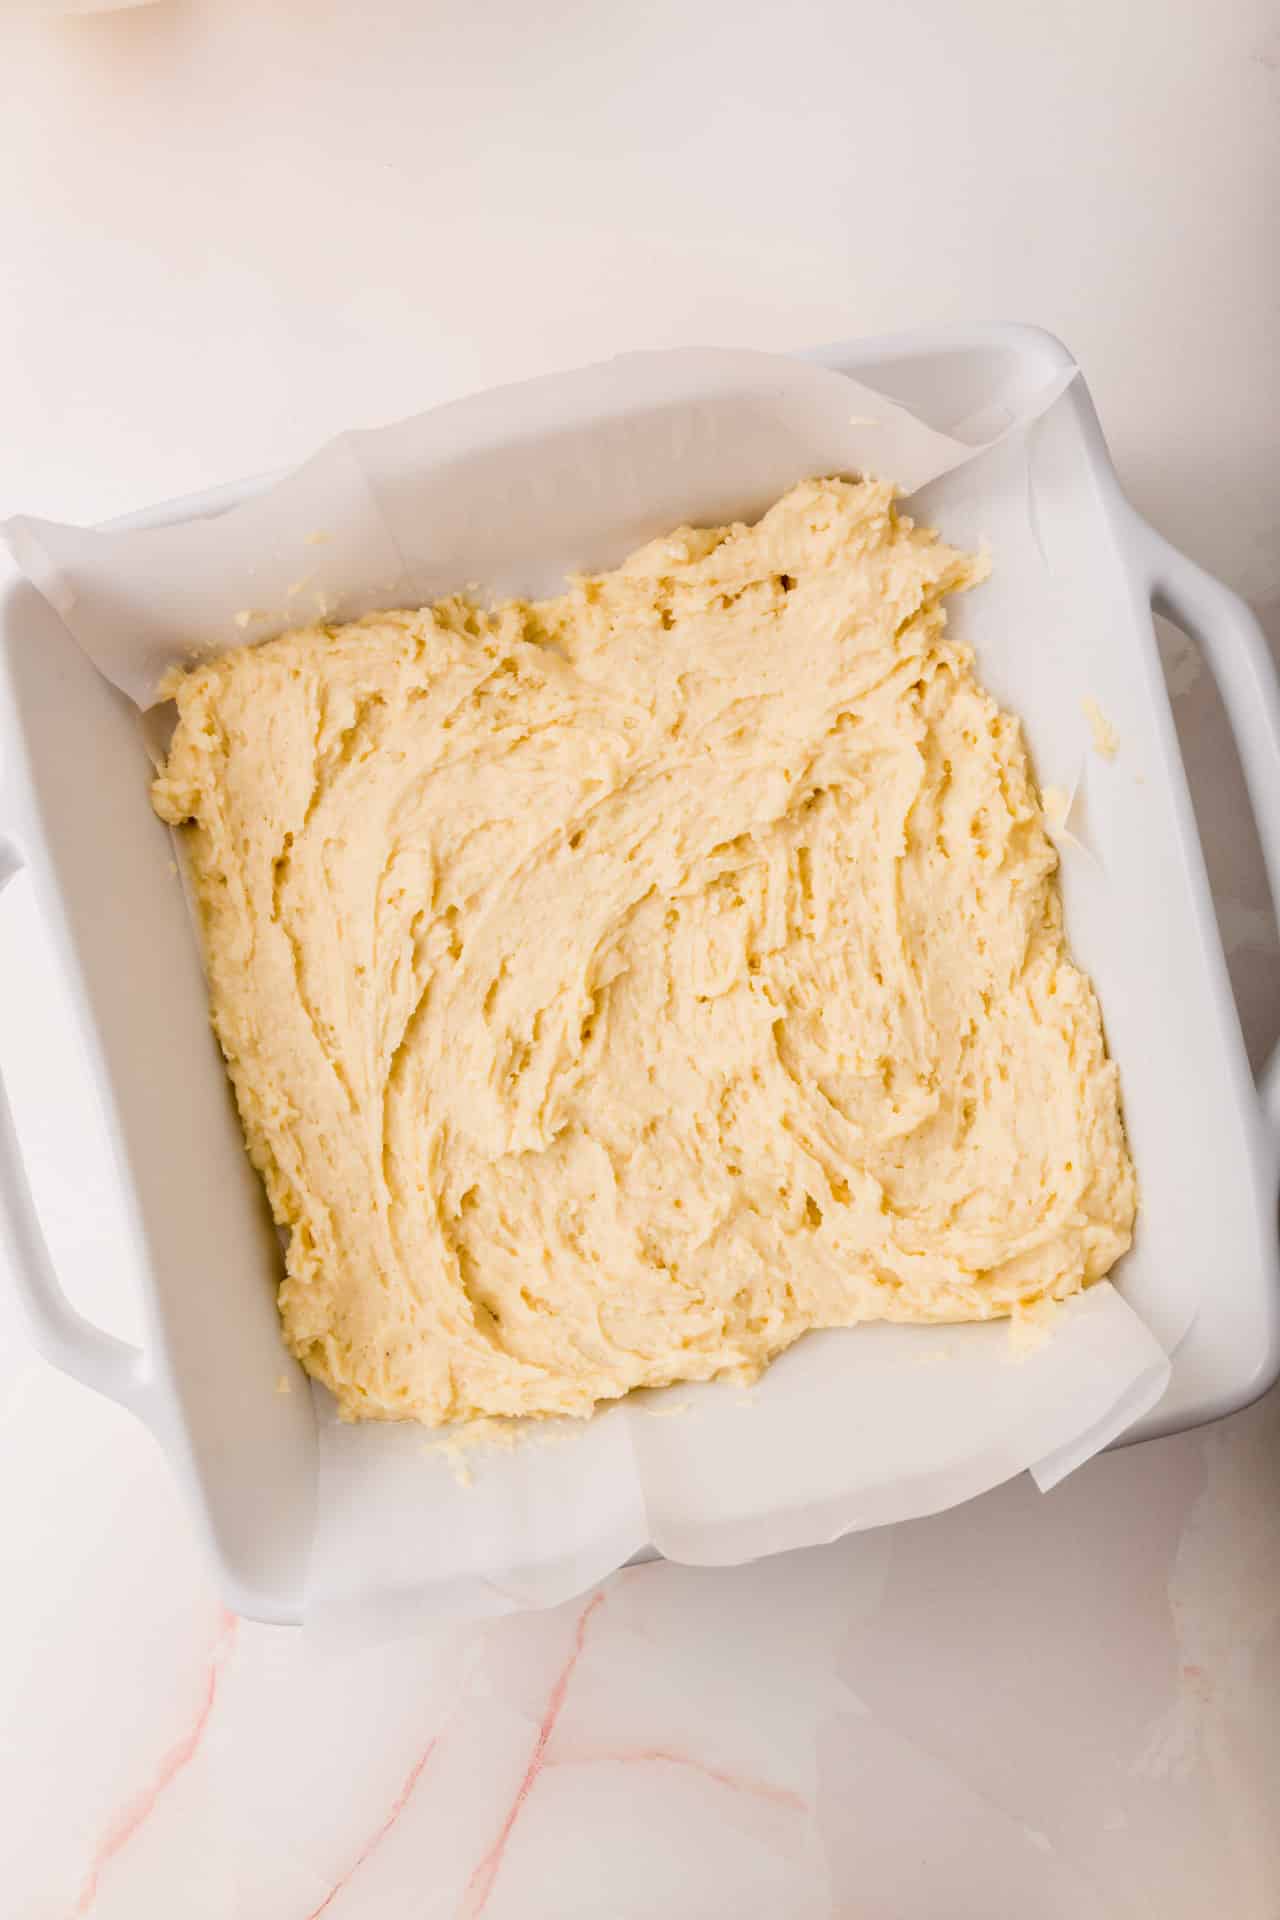 A square baking dish of coffee cake batter that has been spread evenly in the pan.